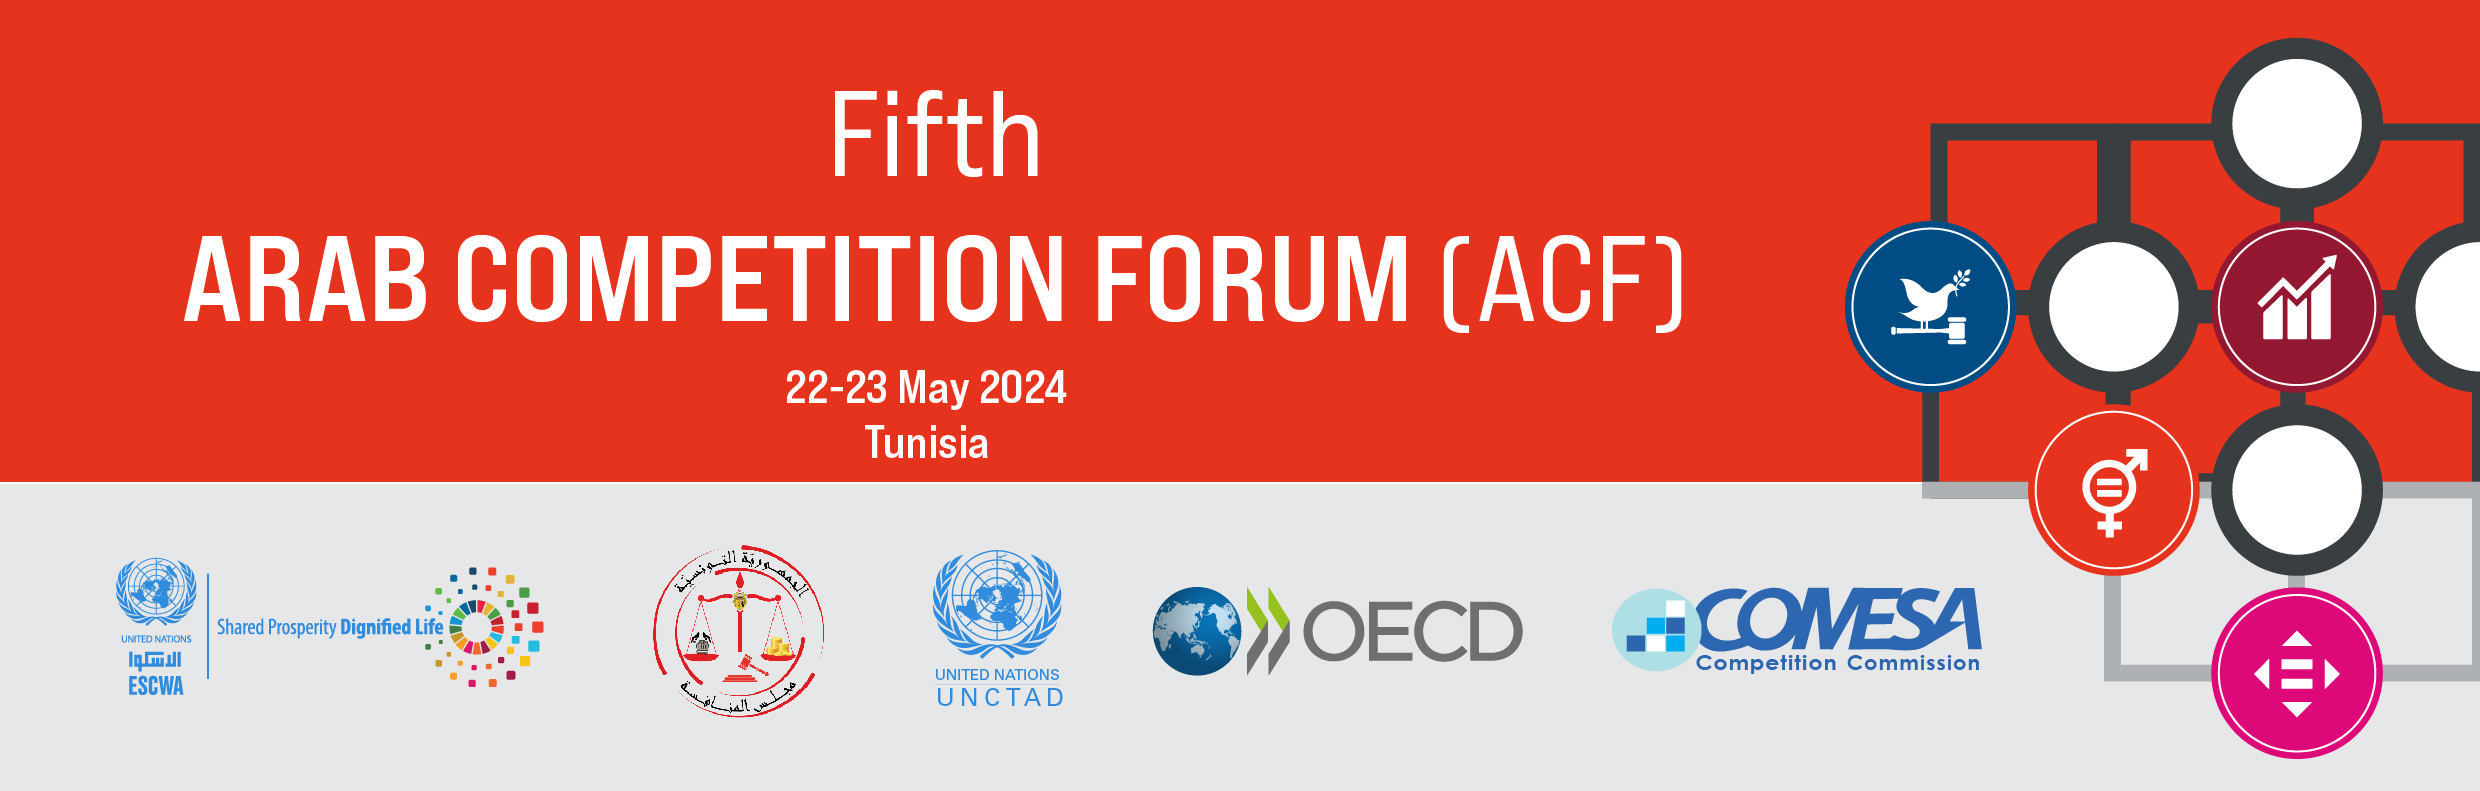 5th Arab Competition Forum (ACF)